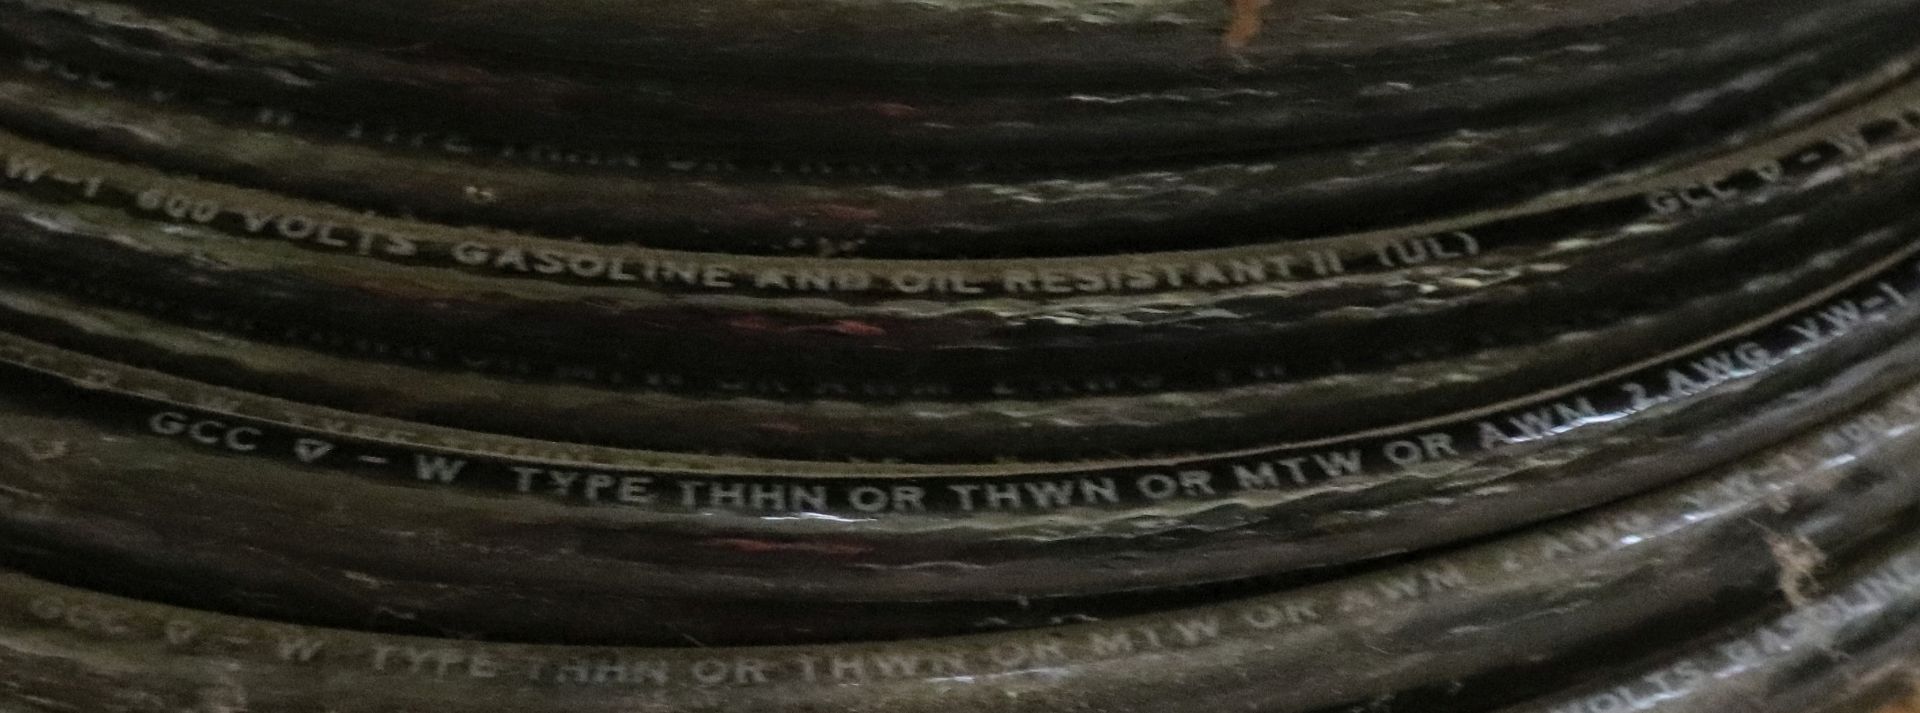 Two spools of copper wire - Image 2 of 2